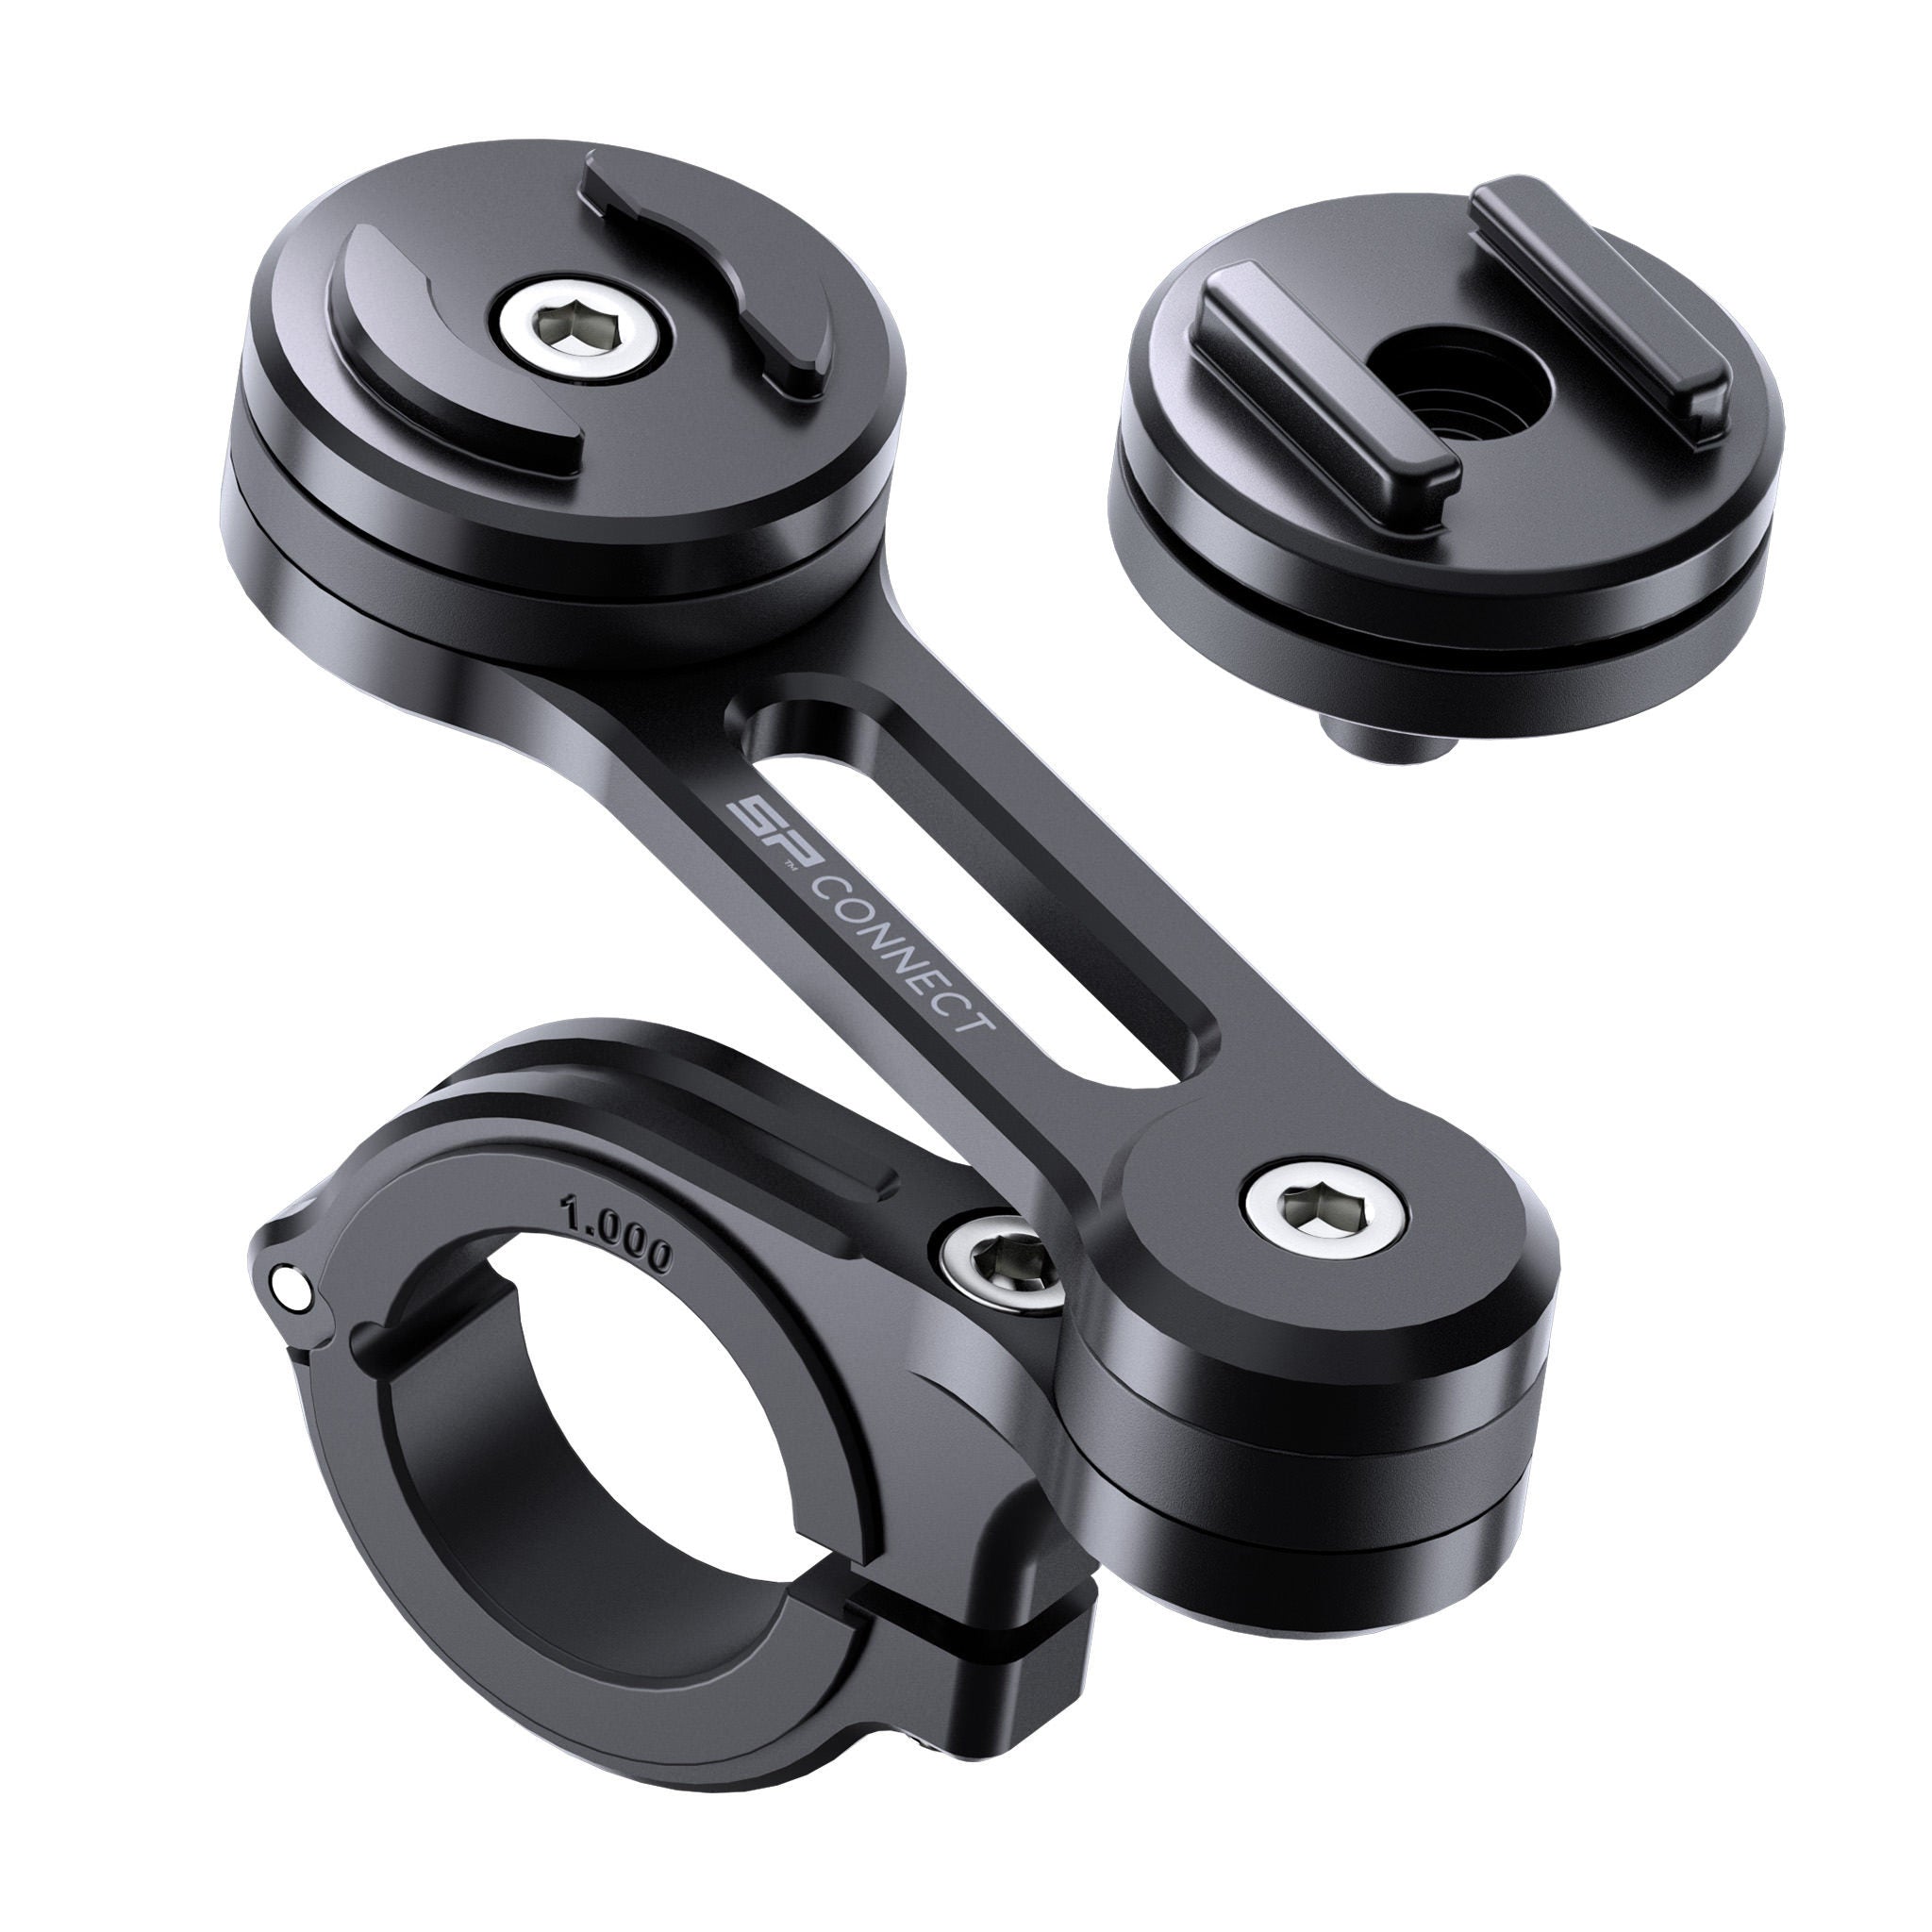 Black SP Connect moto mount set for motorcycle 